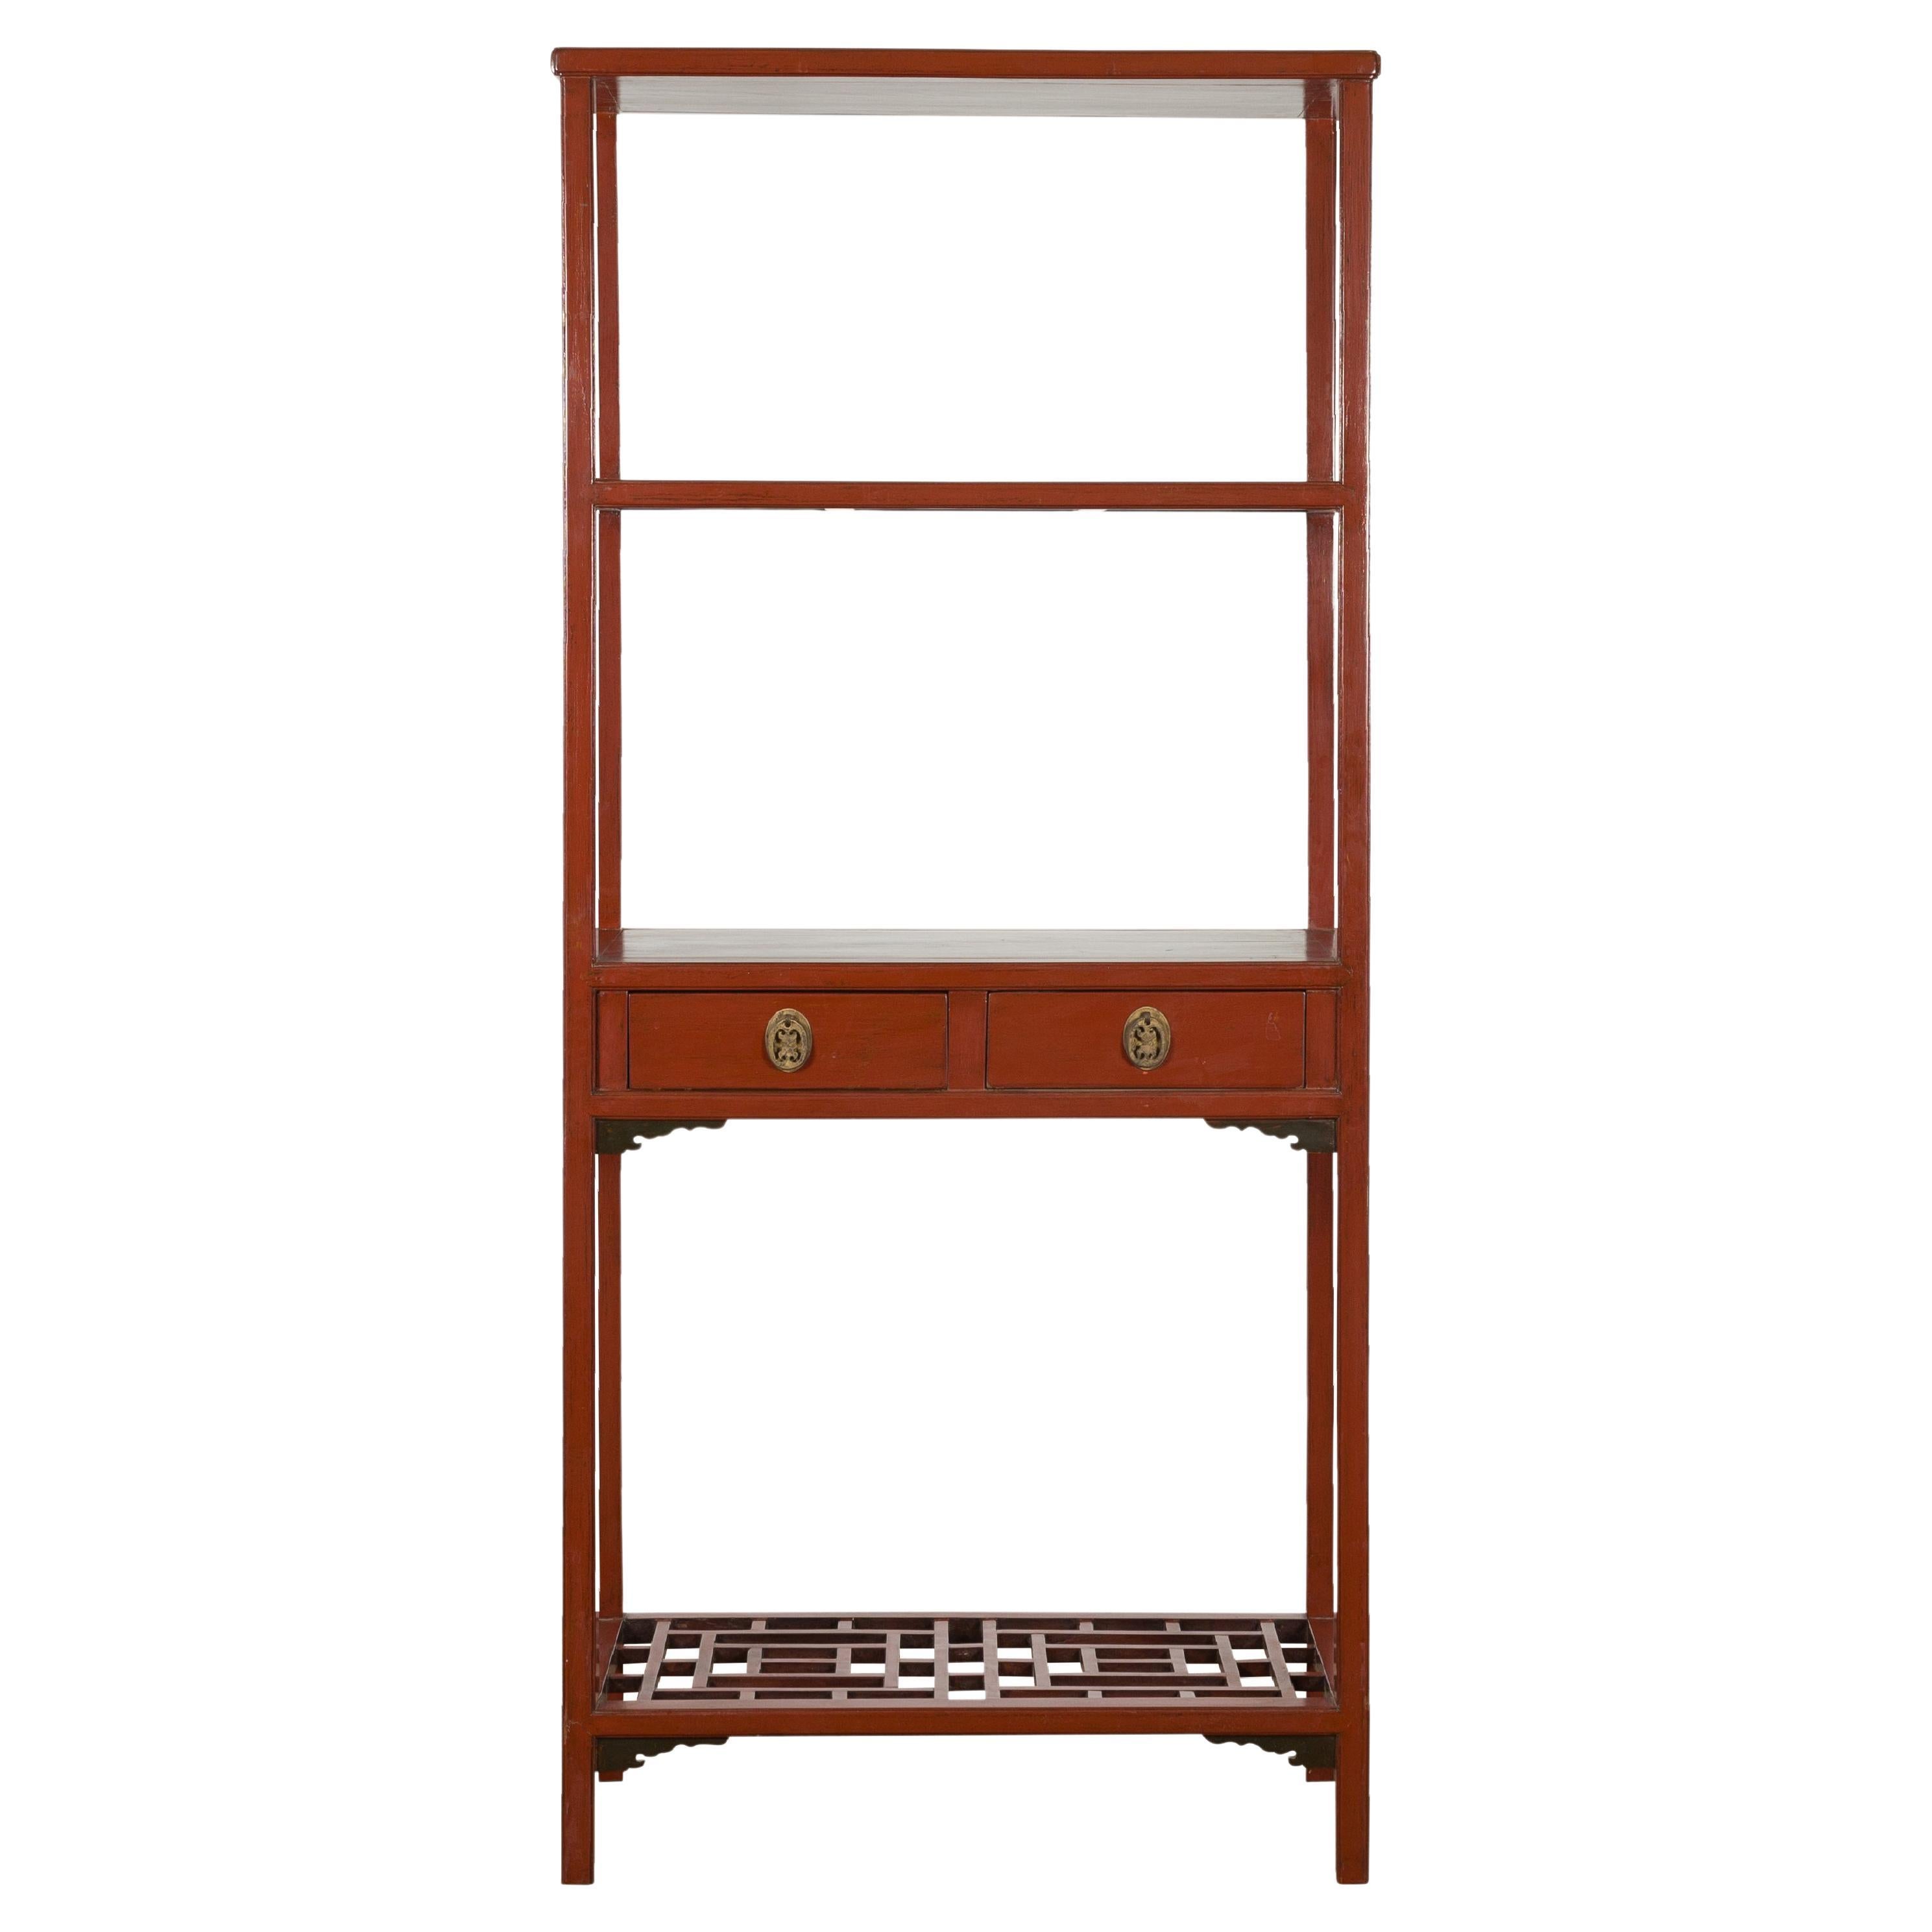 Late Qing Dynasty Red Open Bookshelf with Drawers and Fretwork Shelf